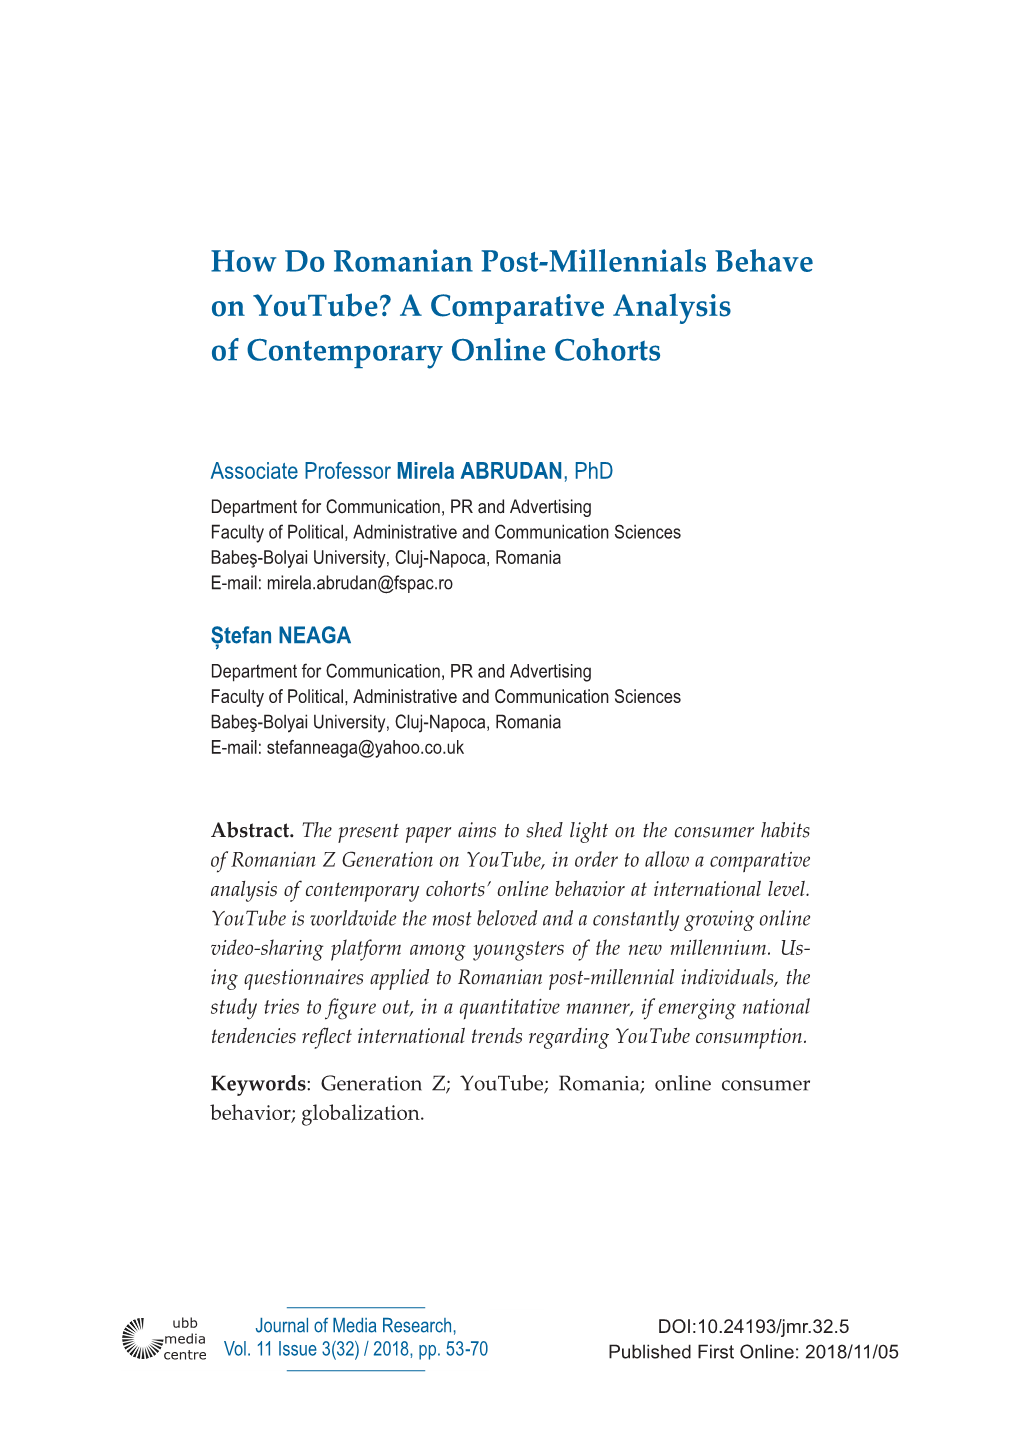 How Do Romanian Post-Millennials Behave on Youtube? a Comparative Analysis of Contemporary Online Cohorts